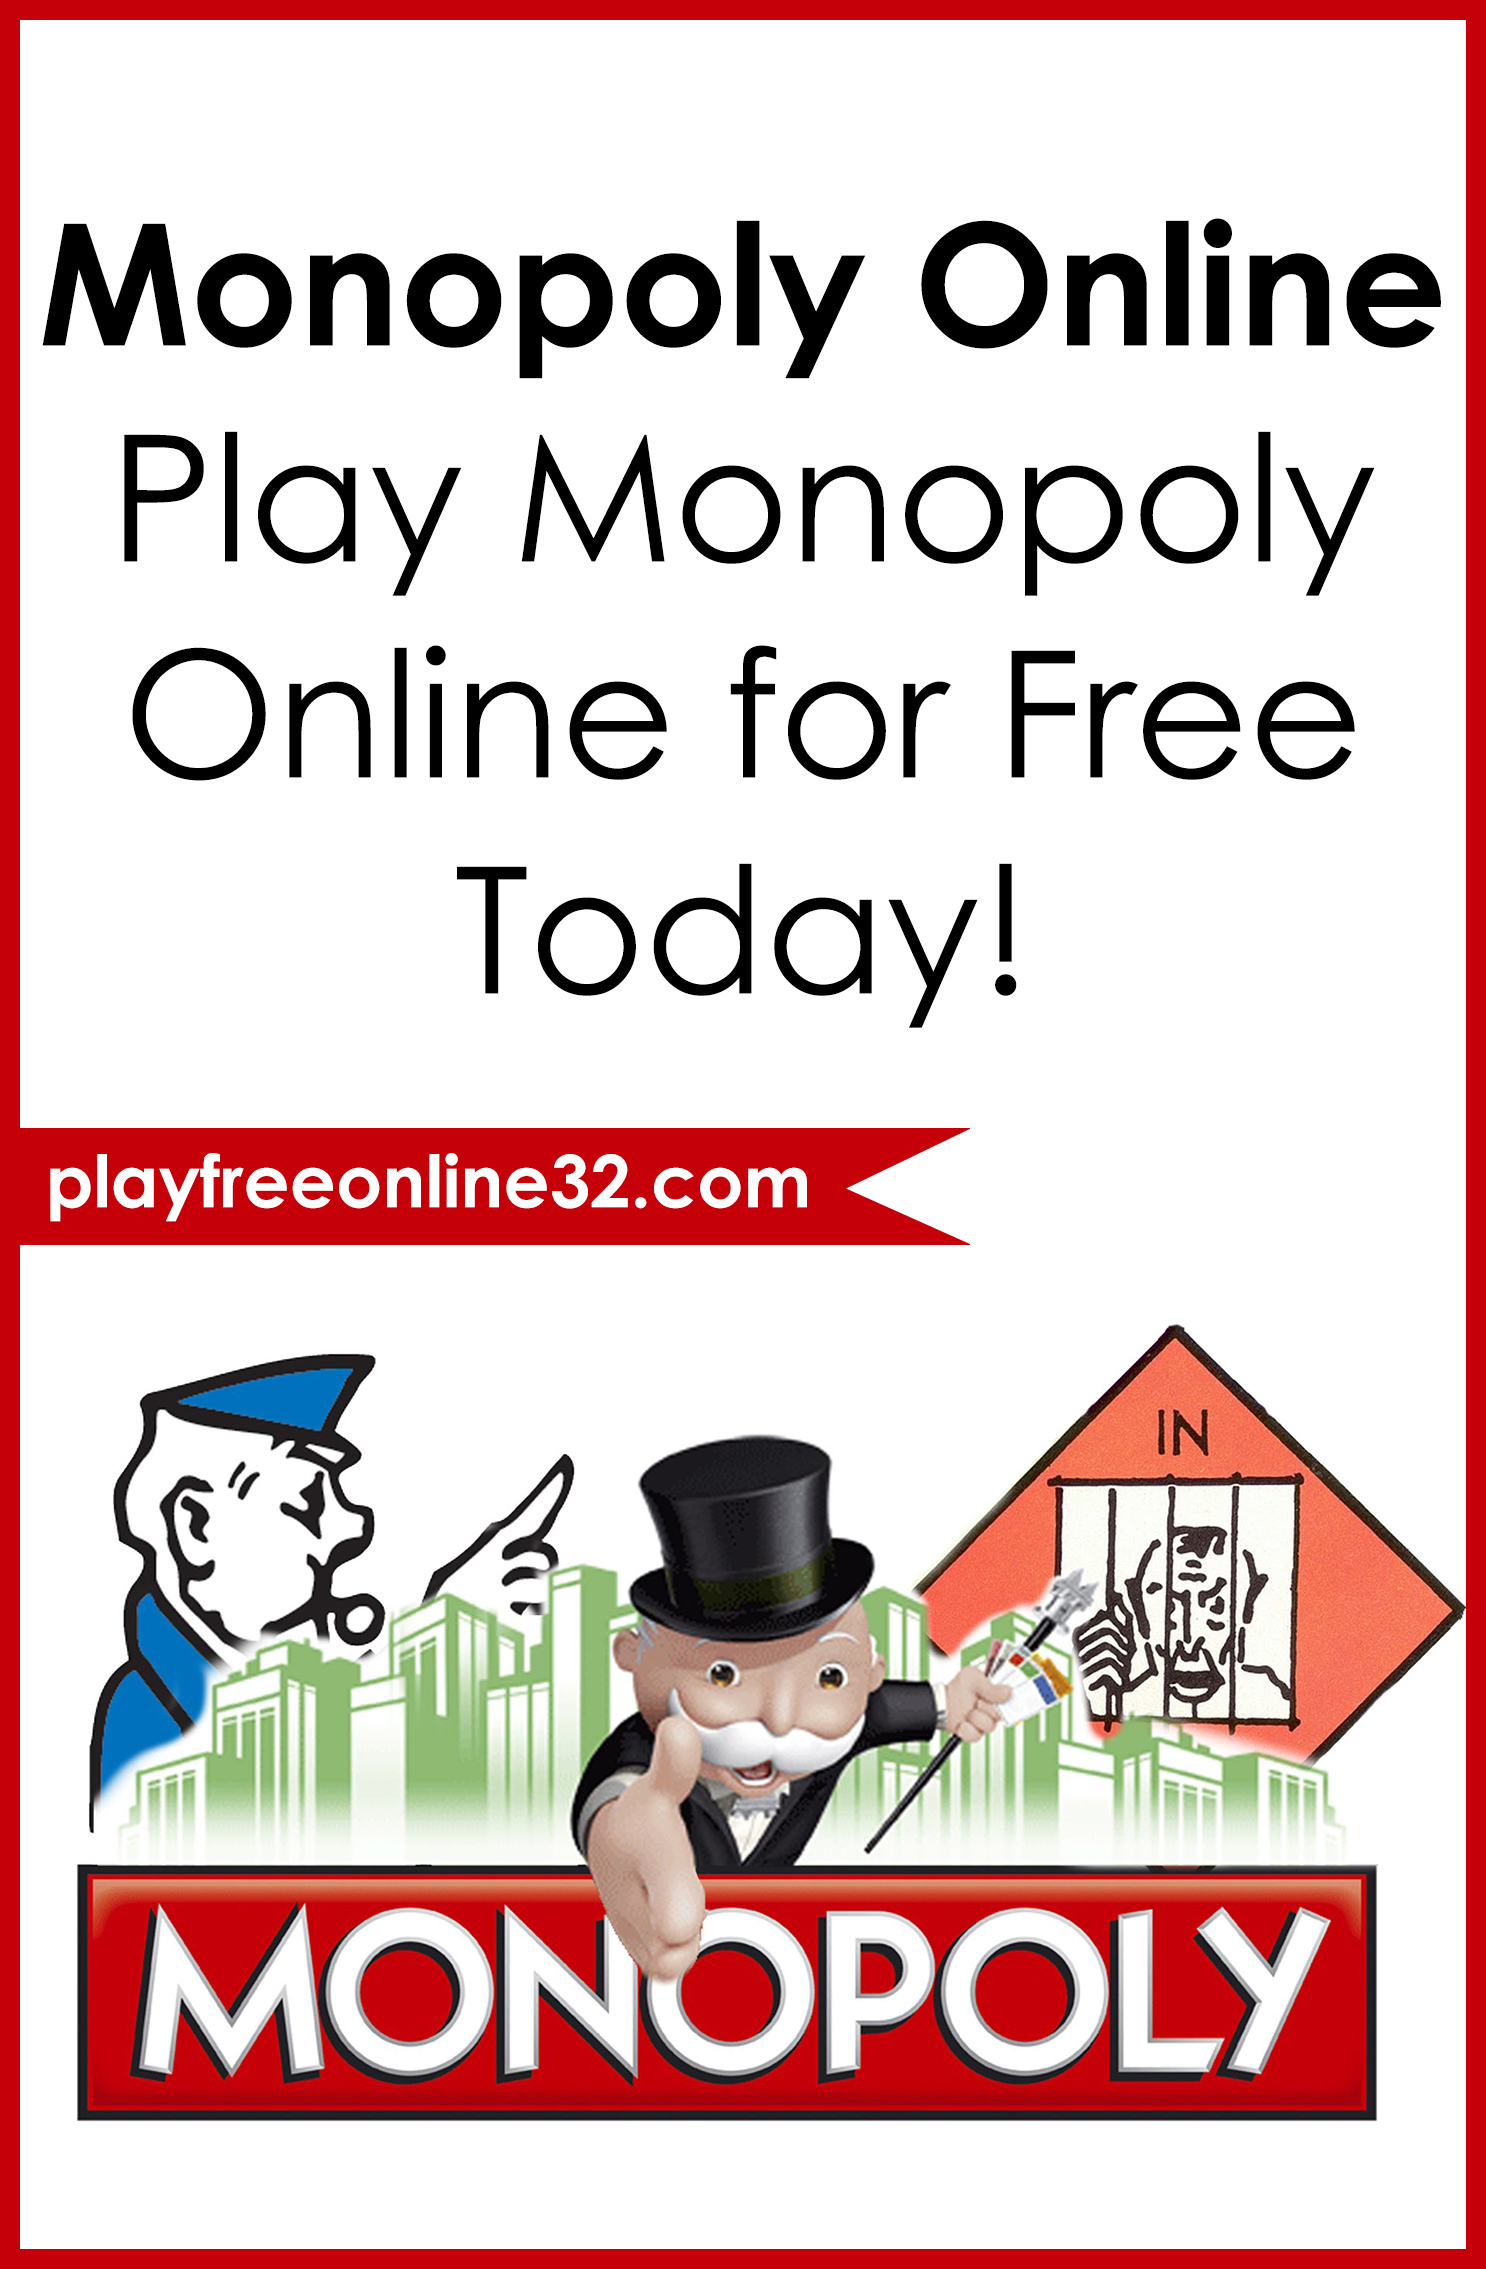 Monopoly Online • Play Monopoly Online for Free Today!